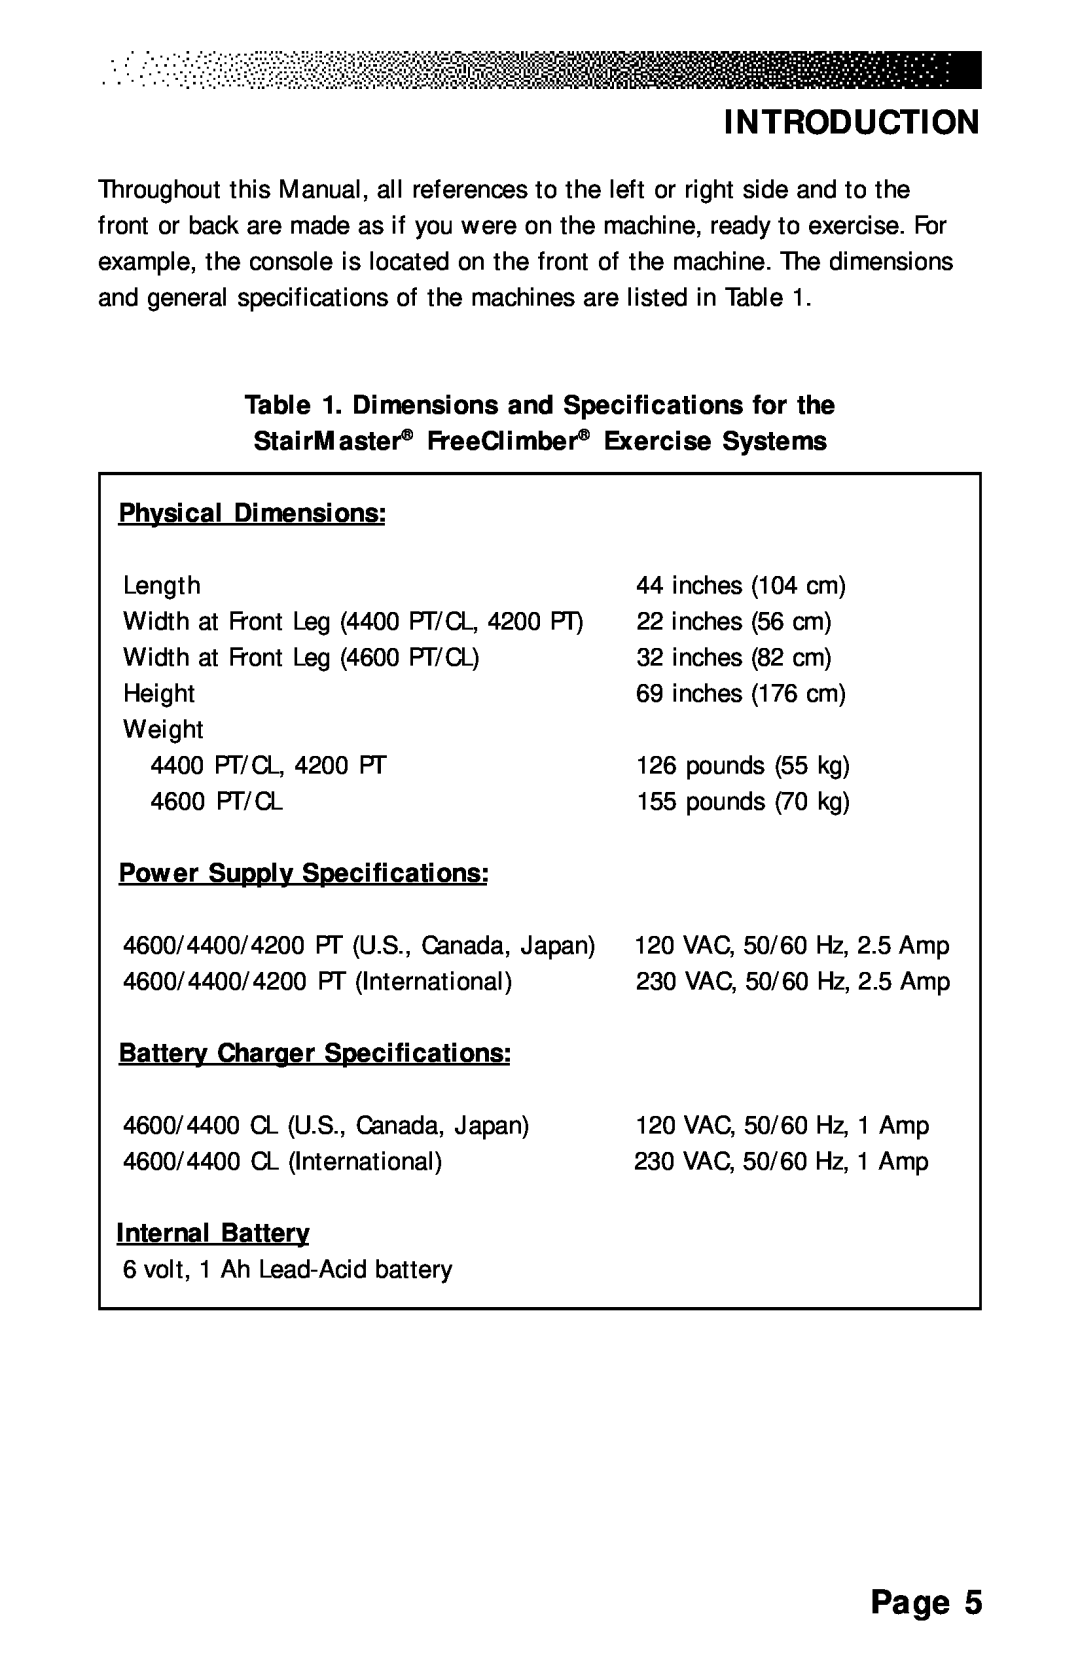 Stairmaster 4400 PT/CL Dimensions and Specifications for the, StairMaster FreeClimber Exercise Systems, Internal Battery 